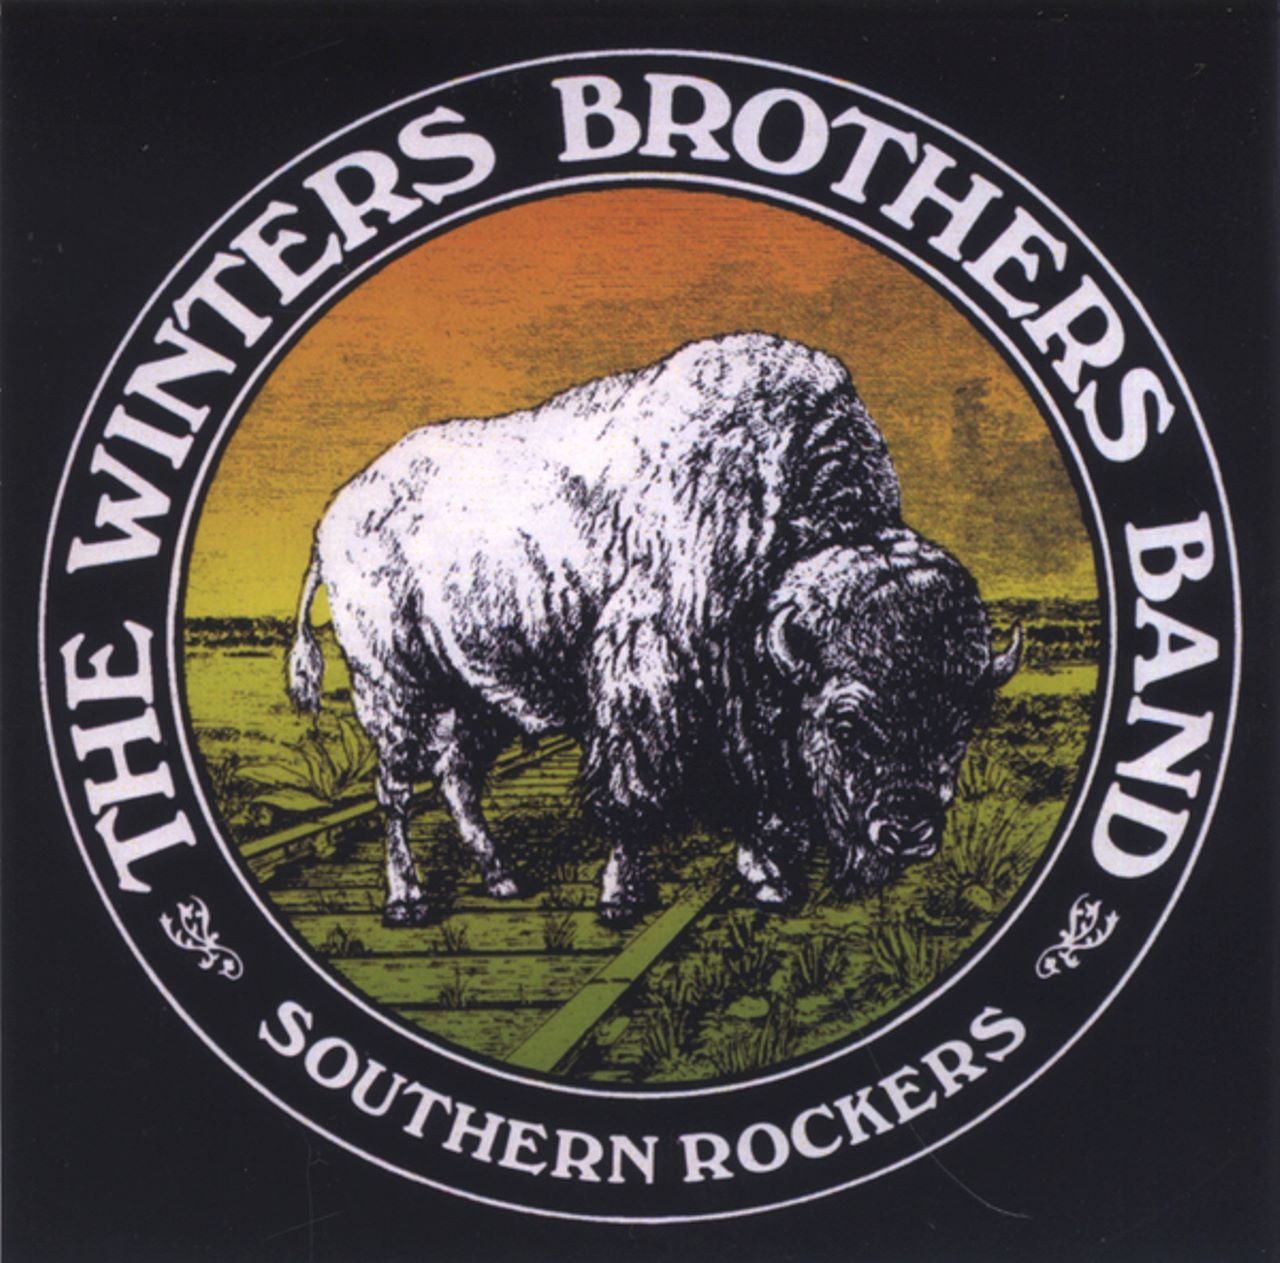 Winters Brothers Band - Southern Rockers cover album